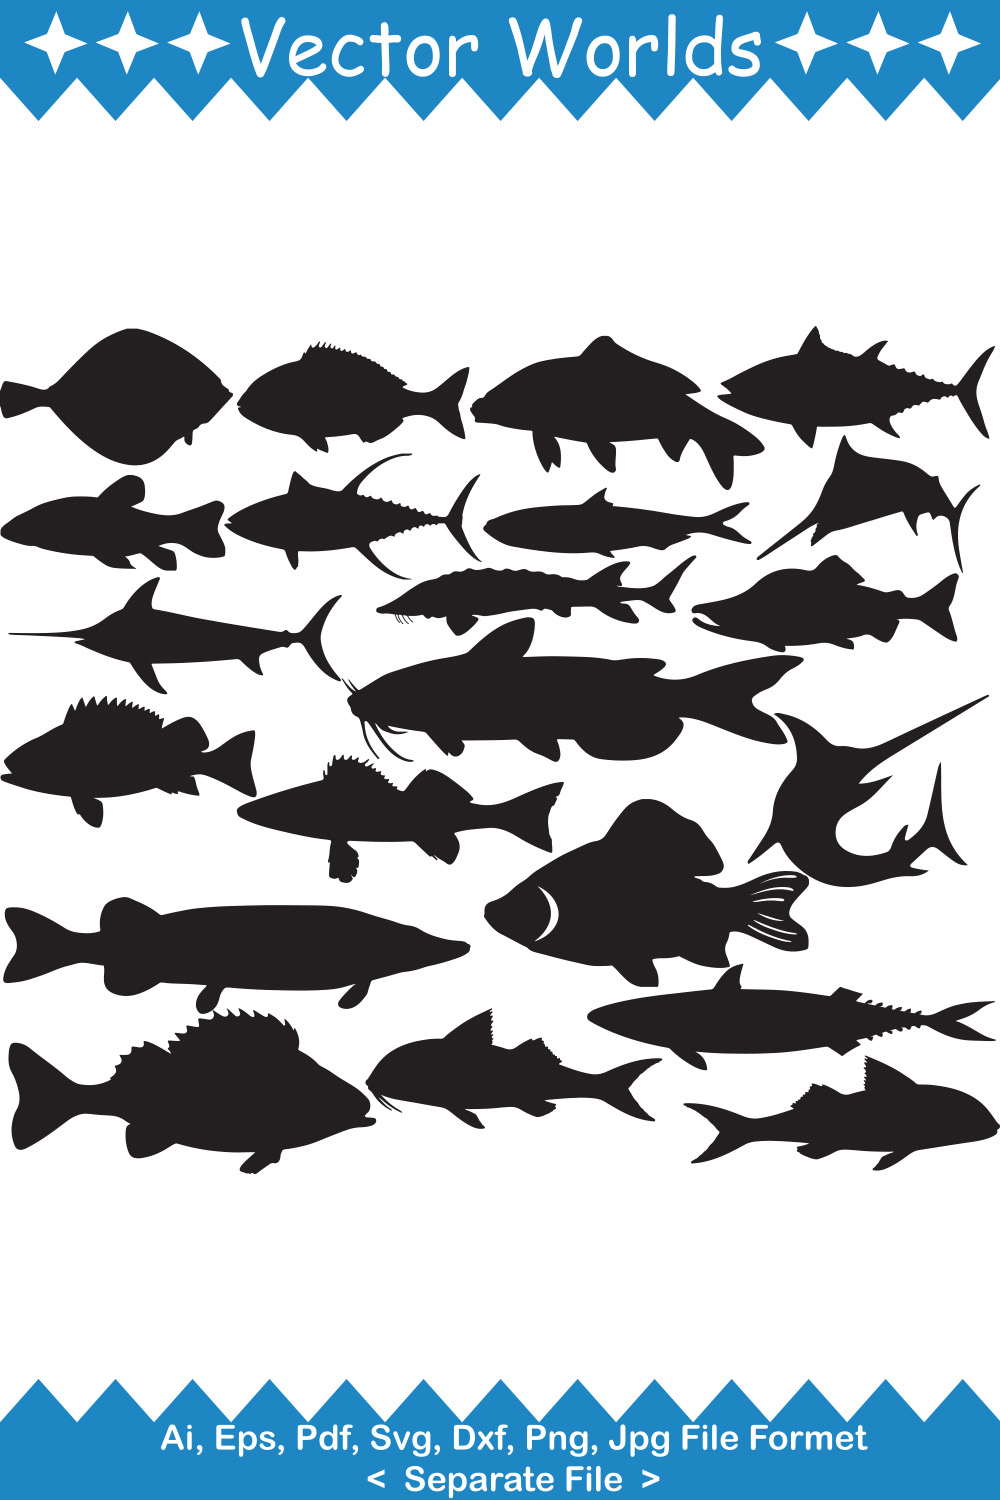 Bunch of fish silhouettes on a white background.